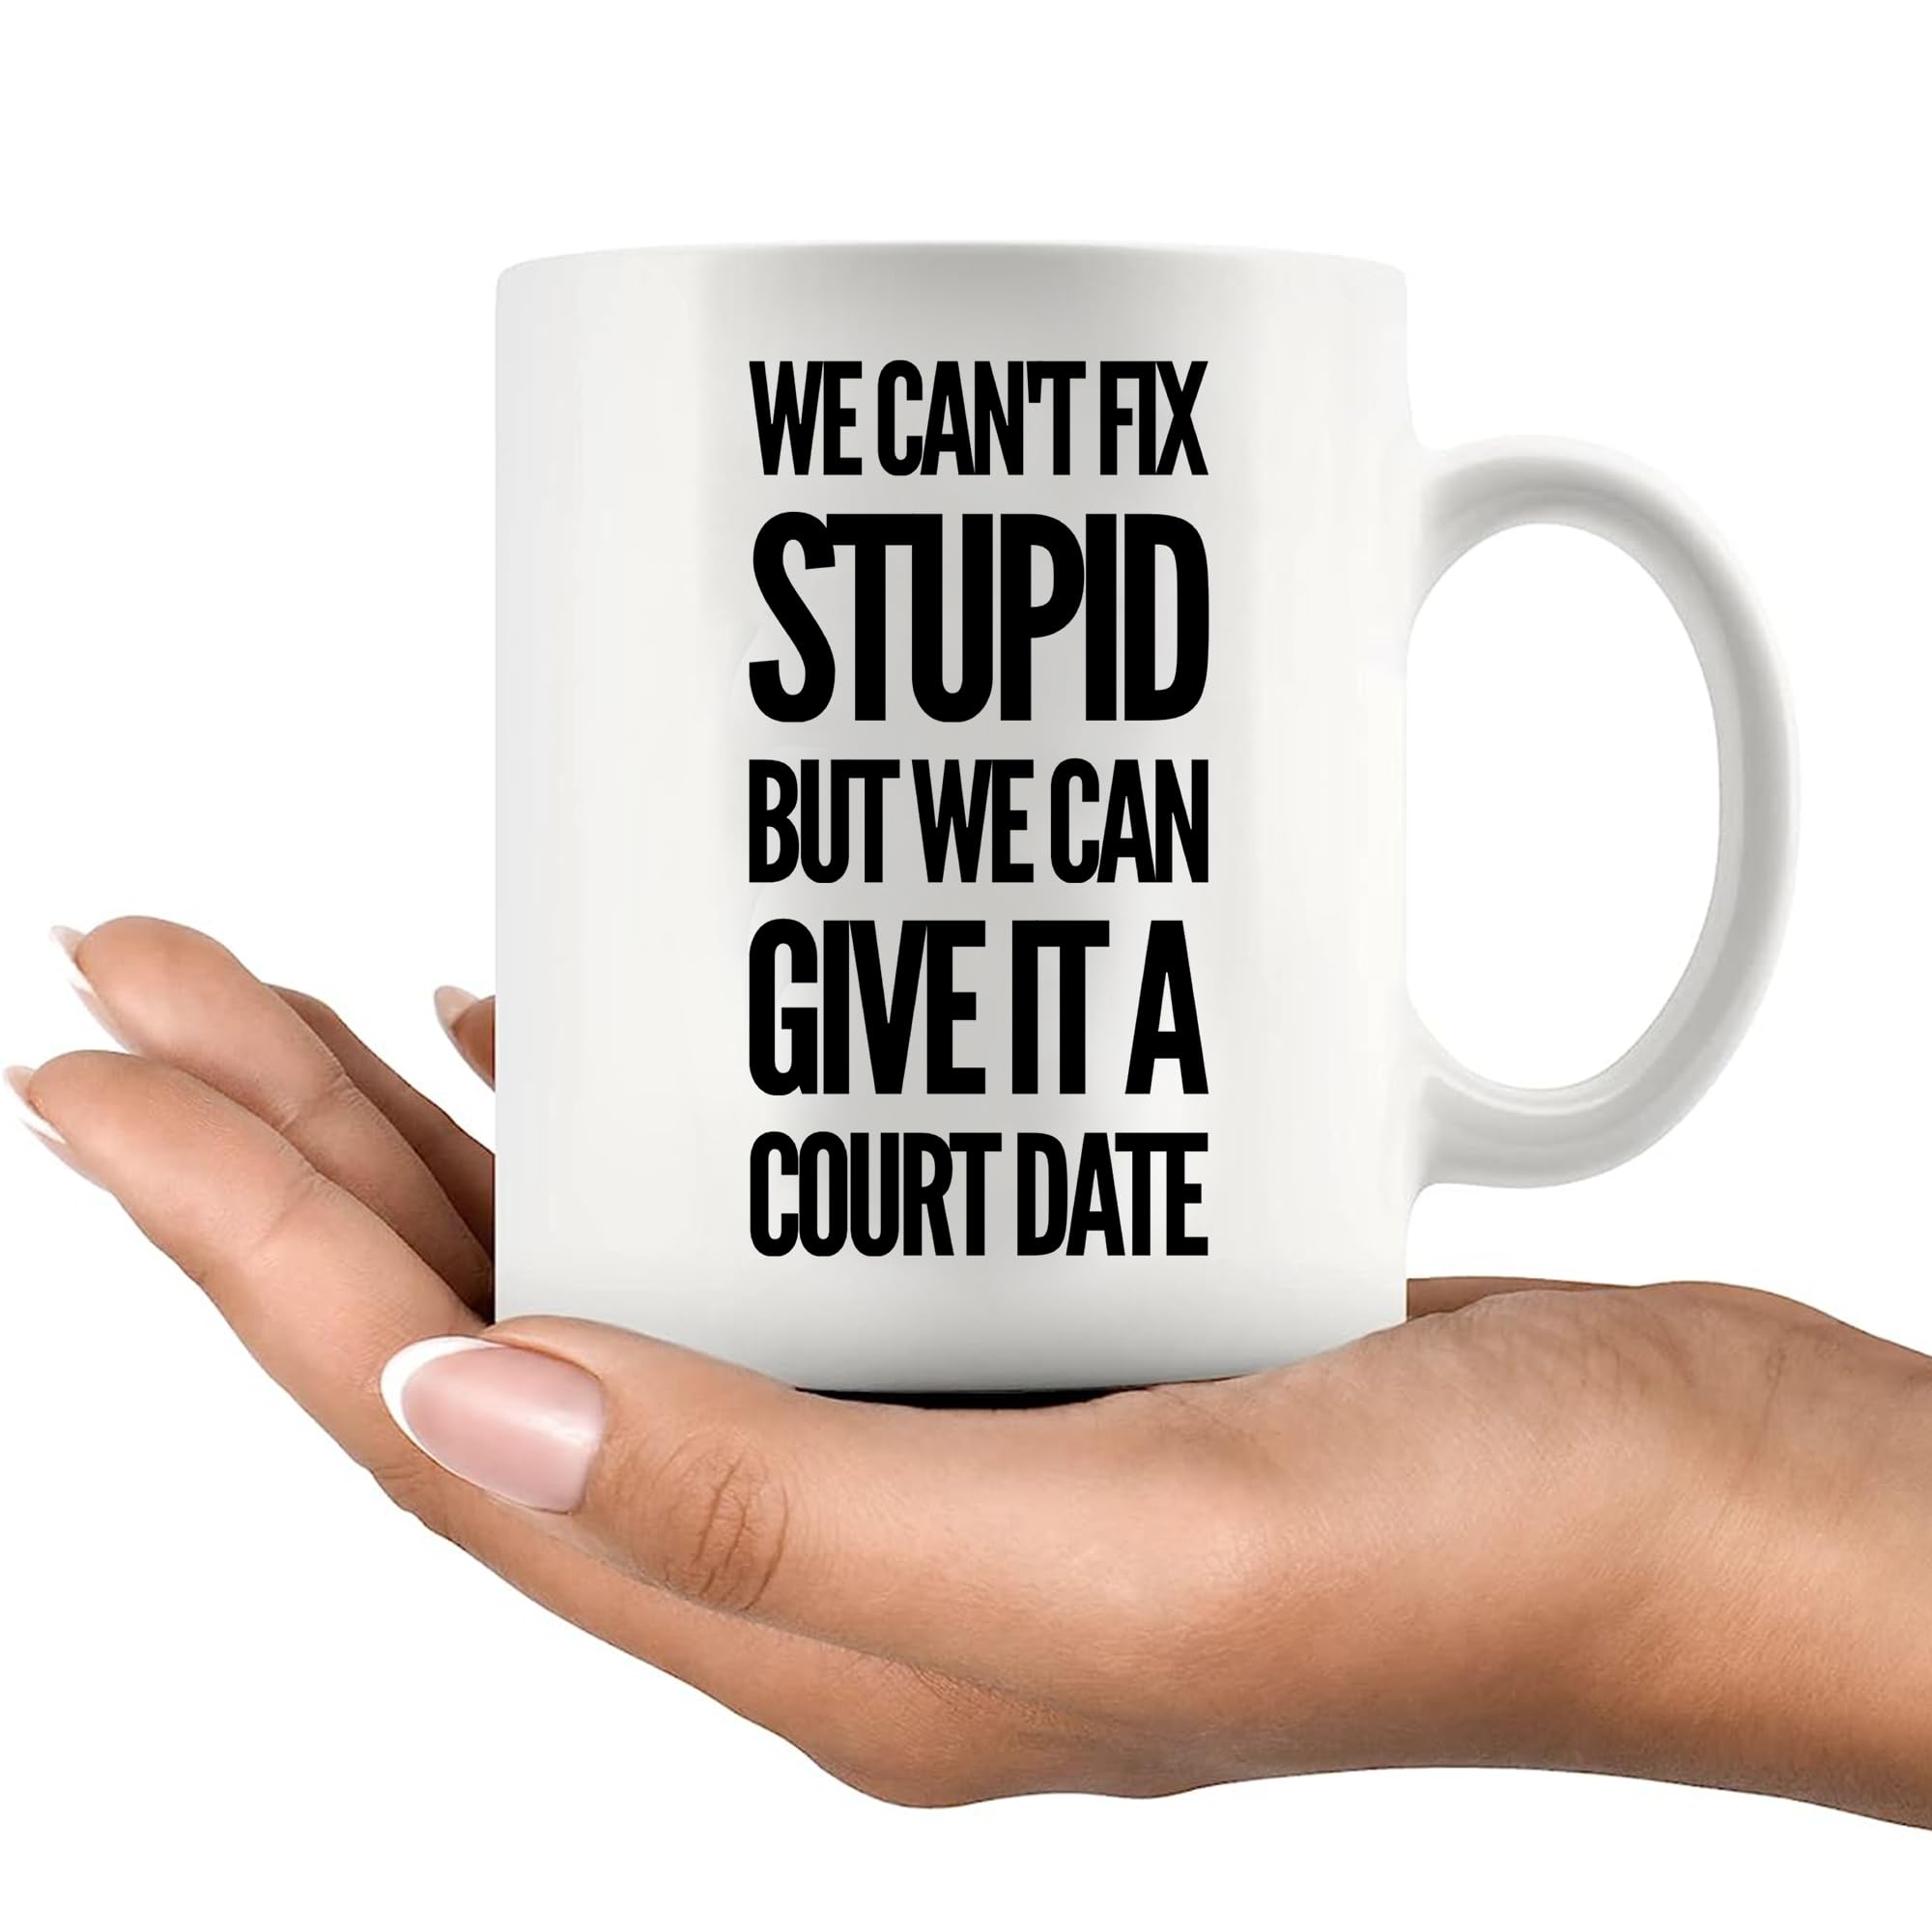 We Can't Fix Stupid But We Can Give It A Court Date Lawyer Law Student Teacher Attorney Ceramic Coffee Mug 11oz White Novelty Drinkware